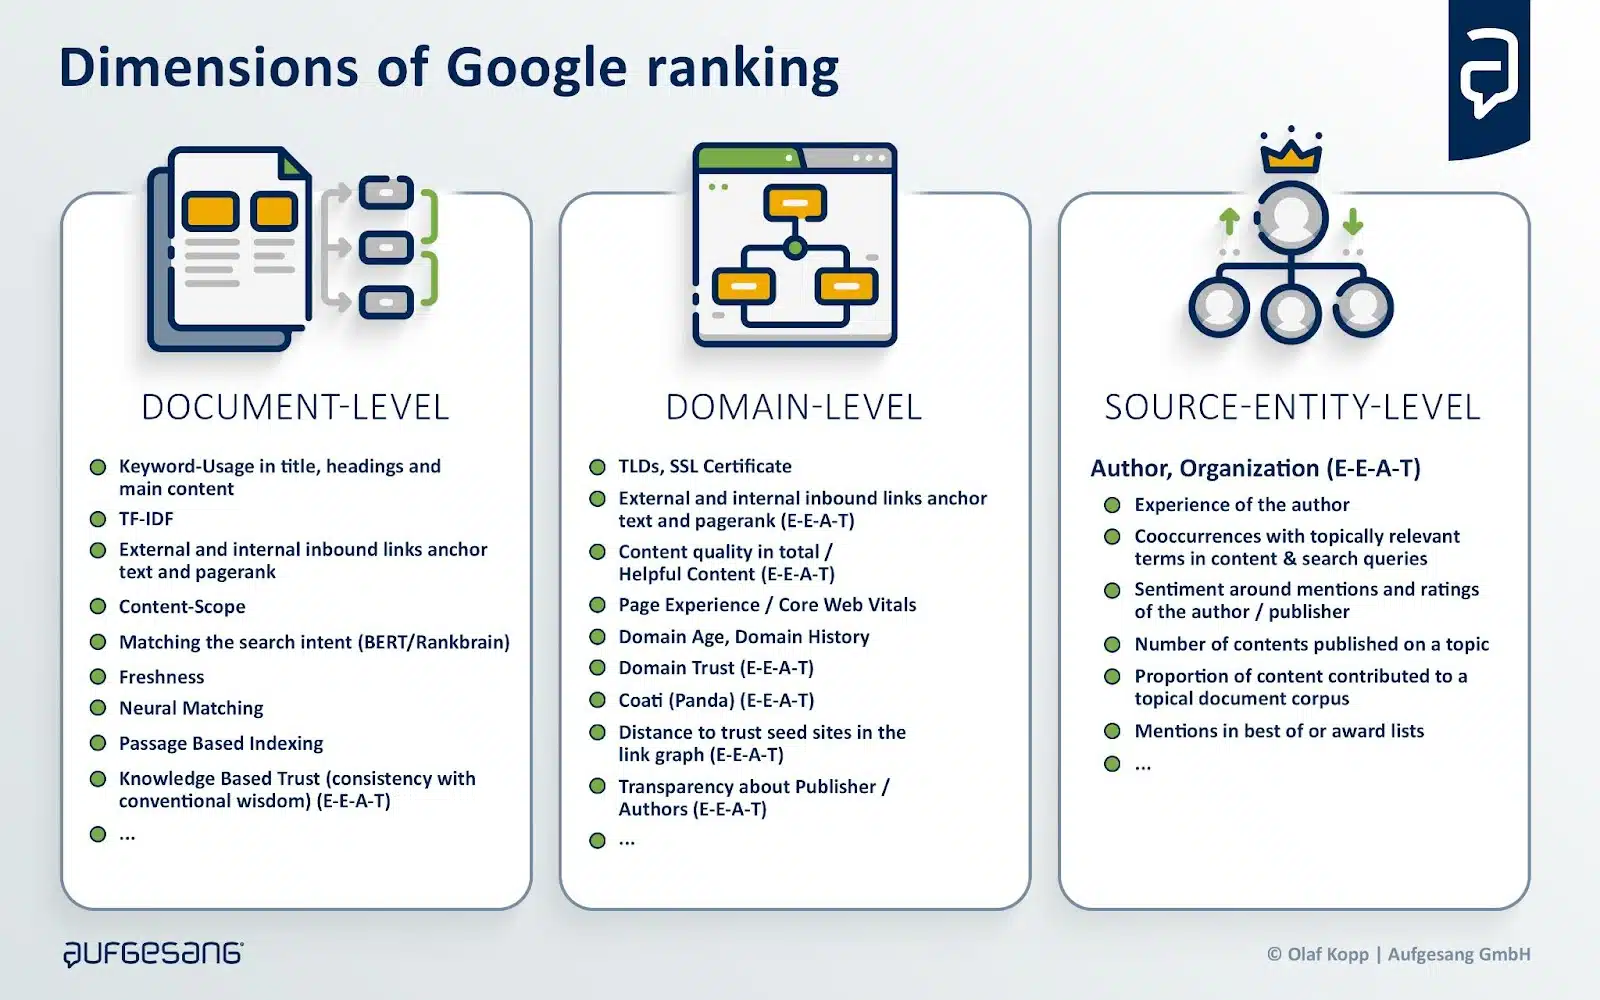 Source: Google Quality Rater Guidelines